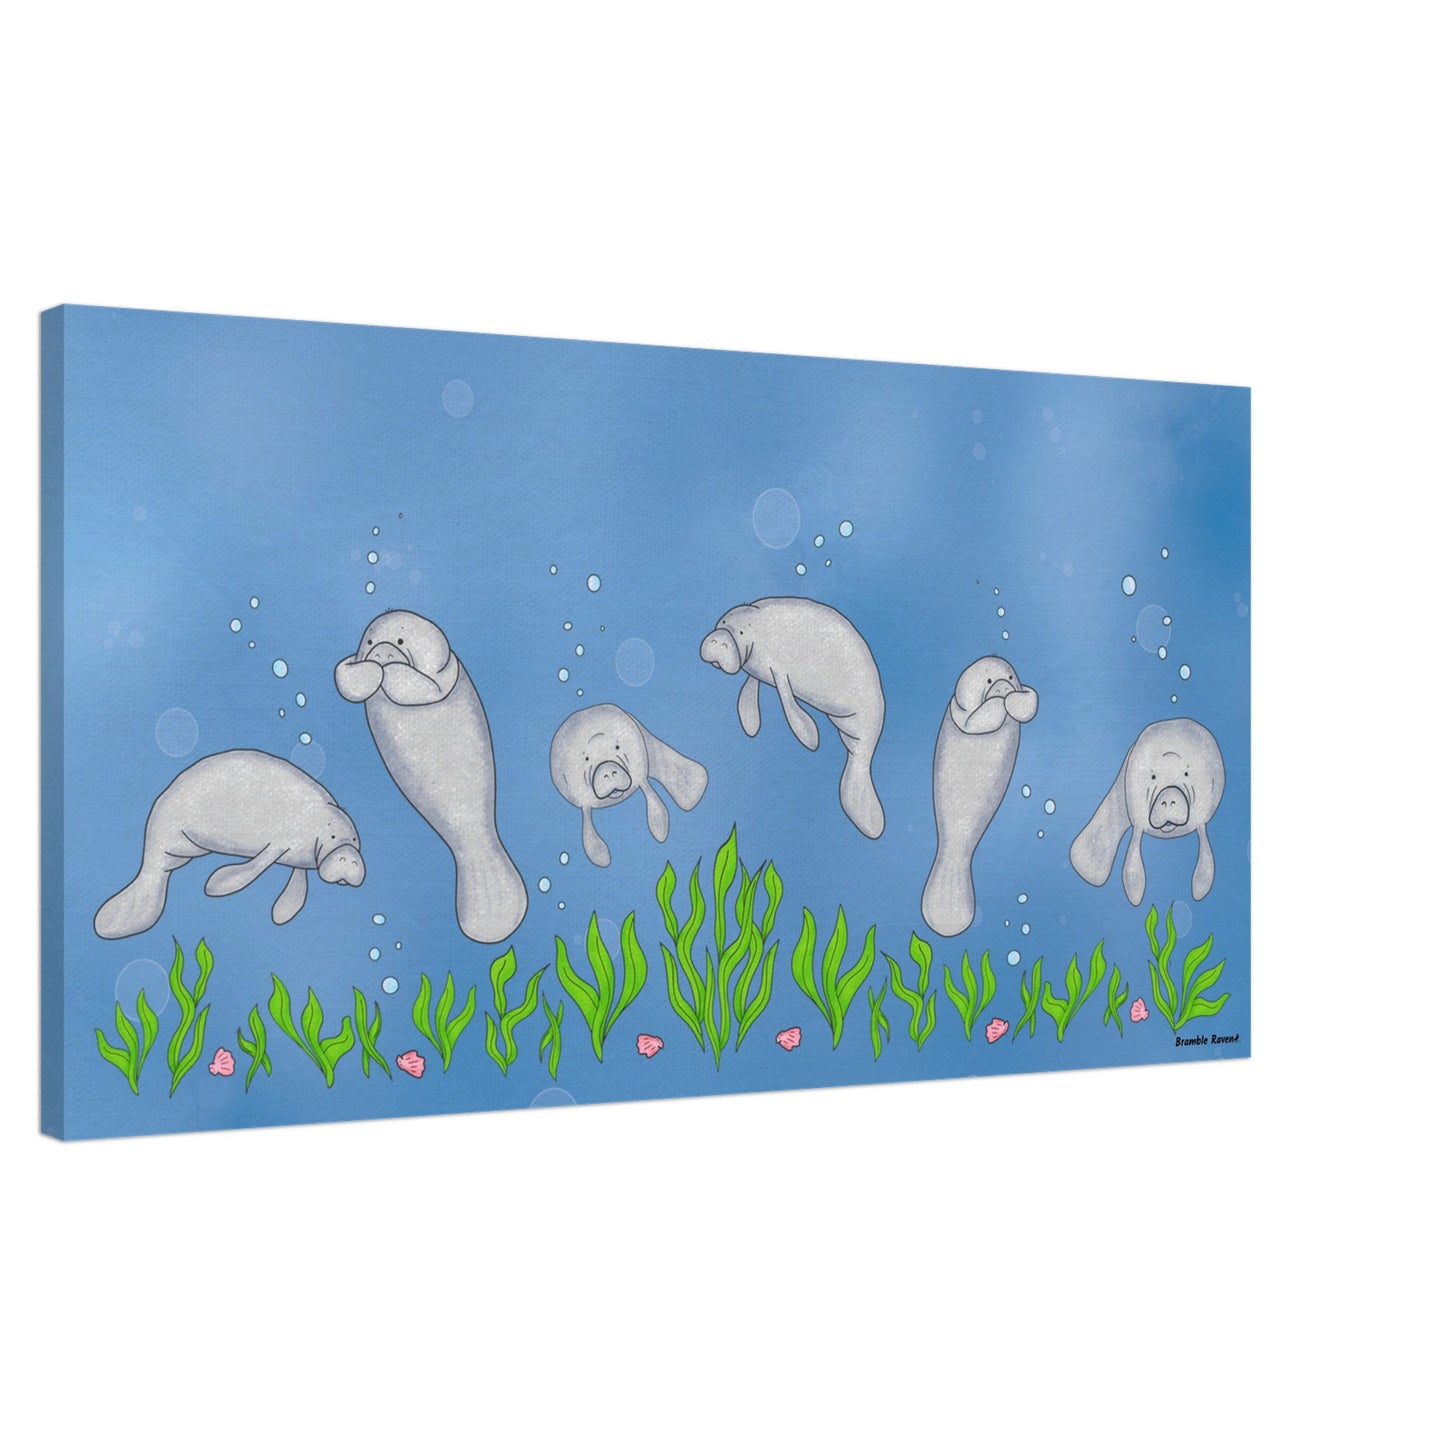 20 by 40 inch slim canvas wall art print featuring cute illustrated manatees swimming above the seabed. Hanging hardware included. Shown at an angle on the wall.